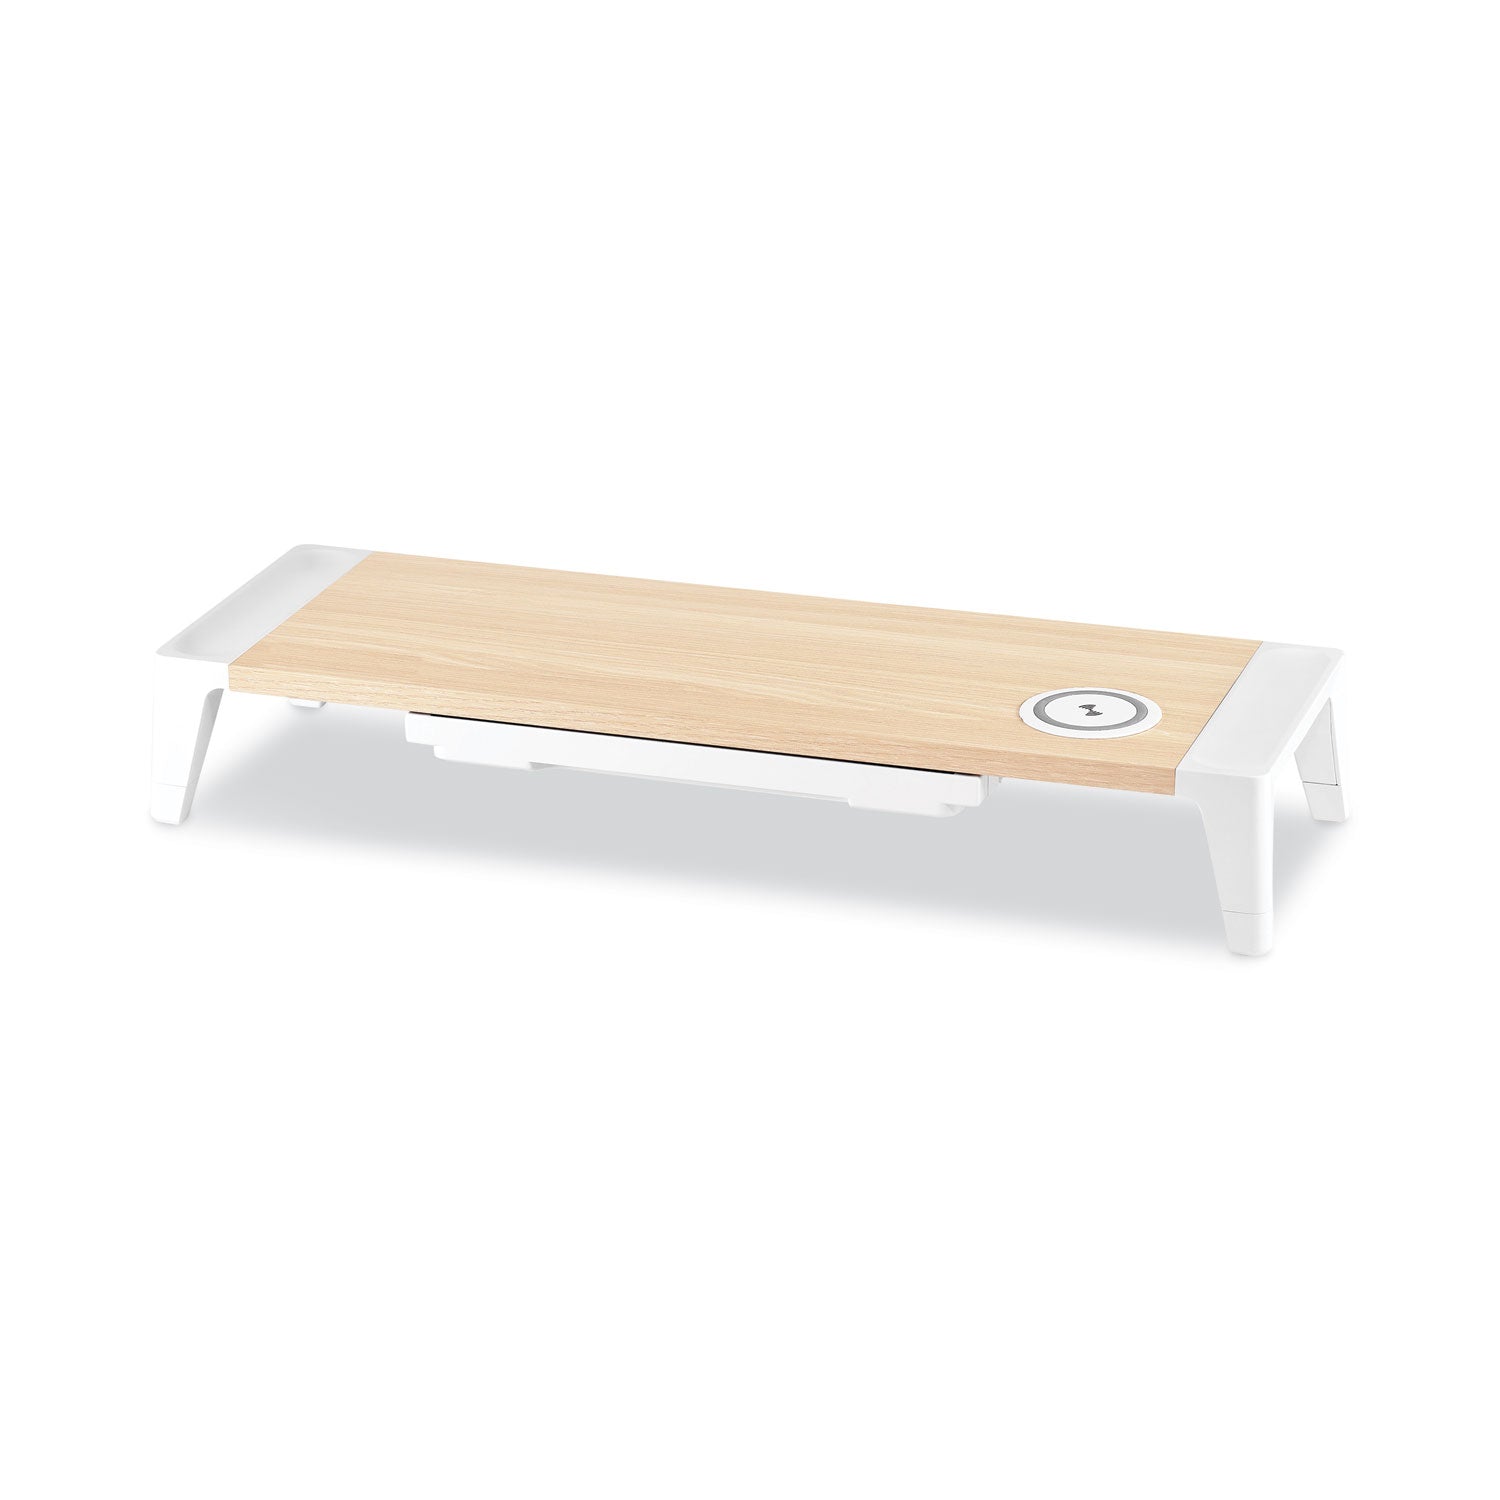 wooden-monitor-stand-with-wireless-charging-pad-98-x-2677-x-413-white_bosstnd2408wh - 8